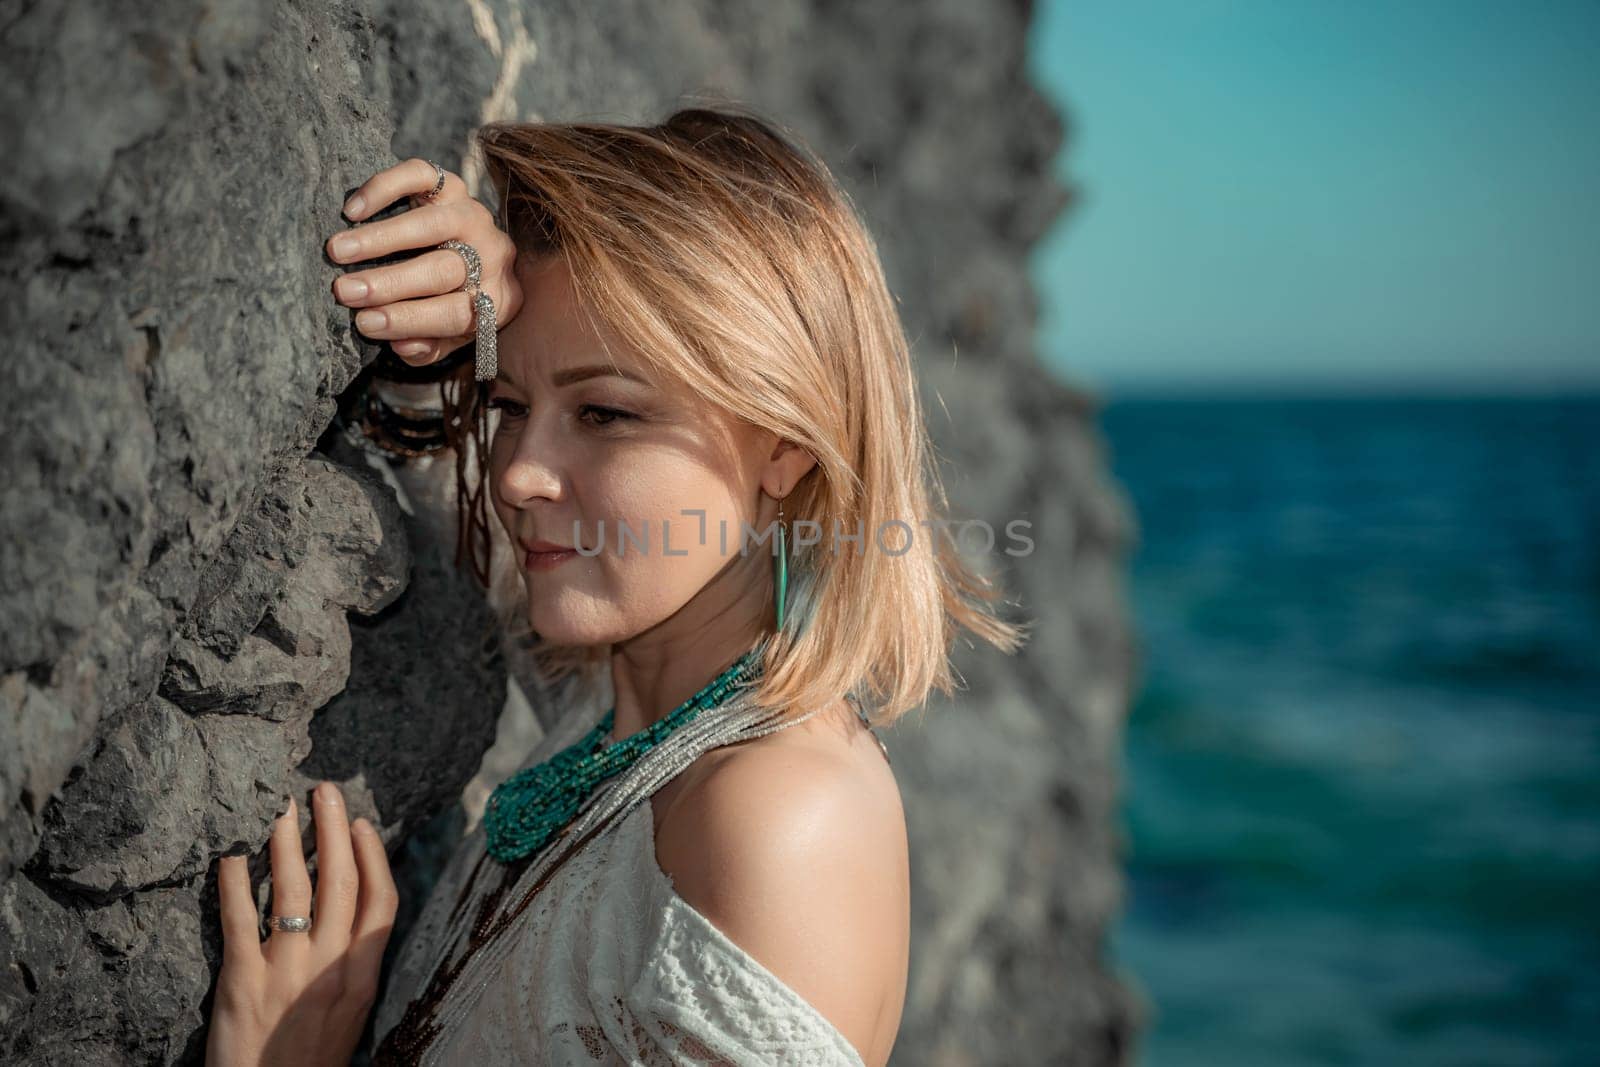 Middle aged woman looks good with blond hair, boho style in white long dress on the beach decorations on her neck and arms